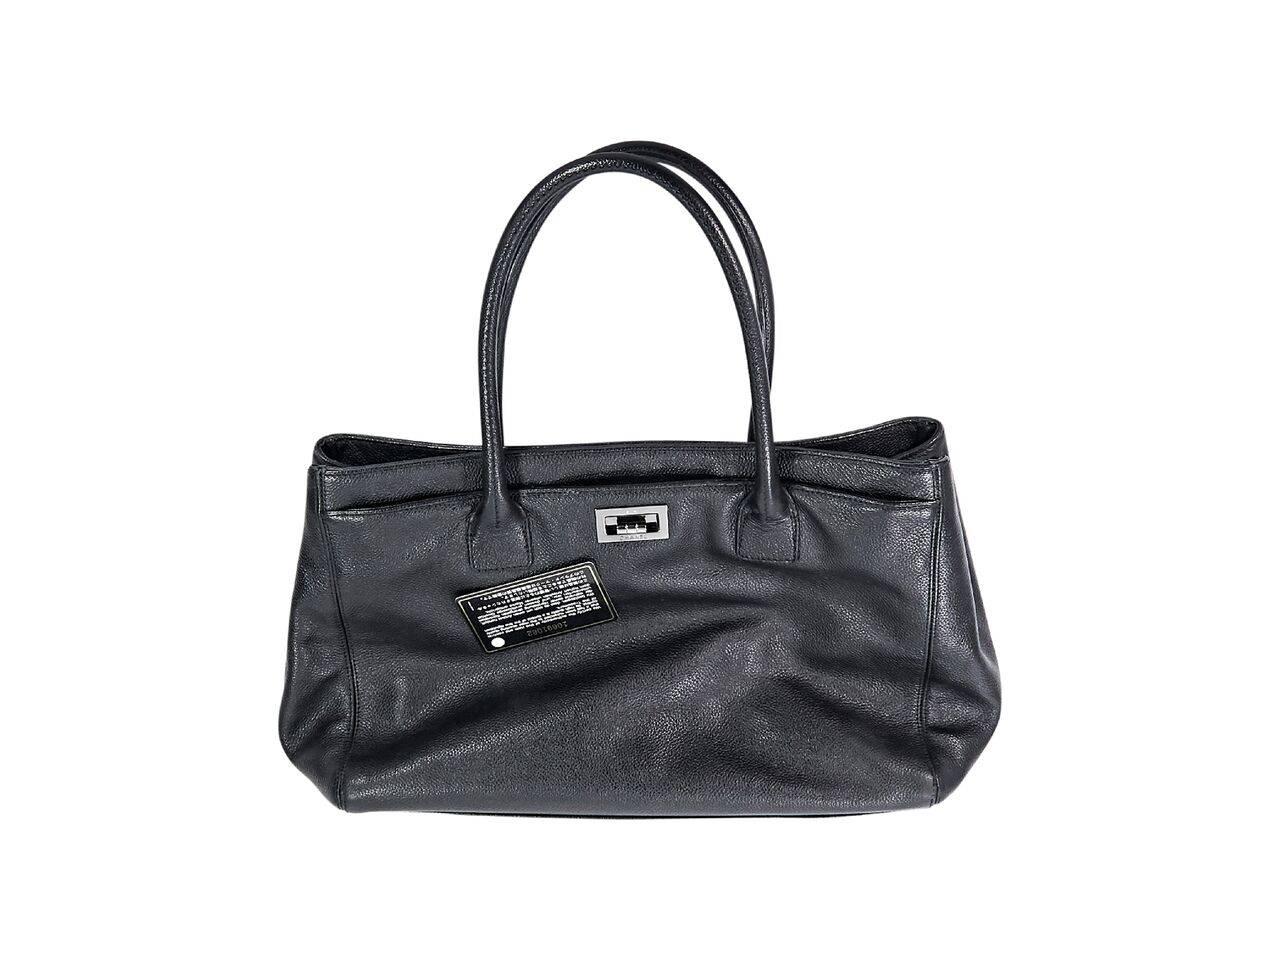 Chanel Black Leather Reissue Tote Bag 1